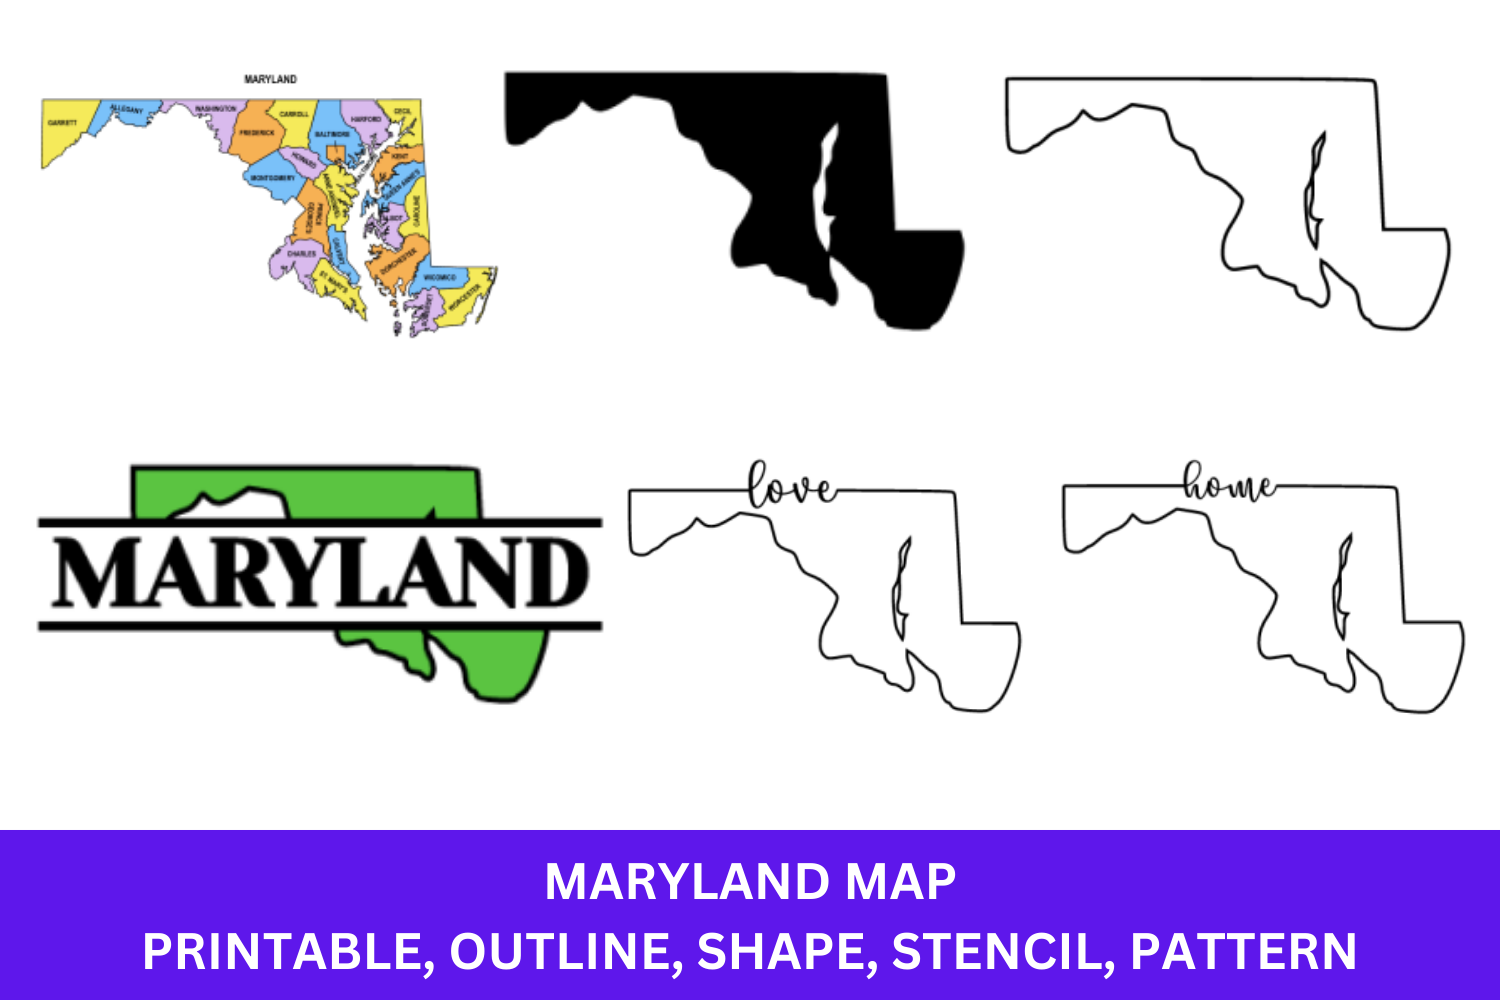 North Carolina – Map Outline, Printable State, Shape, Stencil, Pattern –  DIY Projects, Patterns, Monograms, Designs, Templates